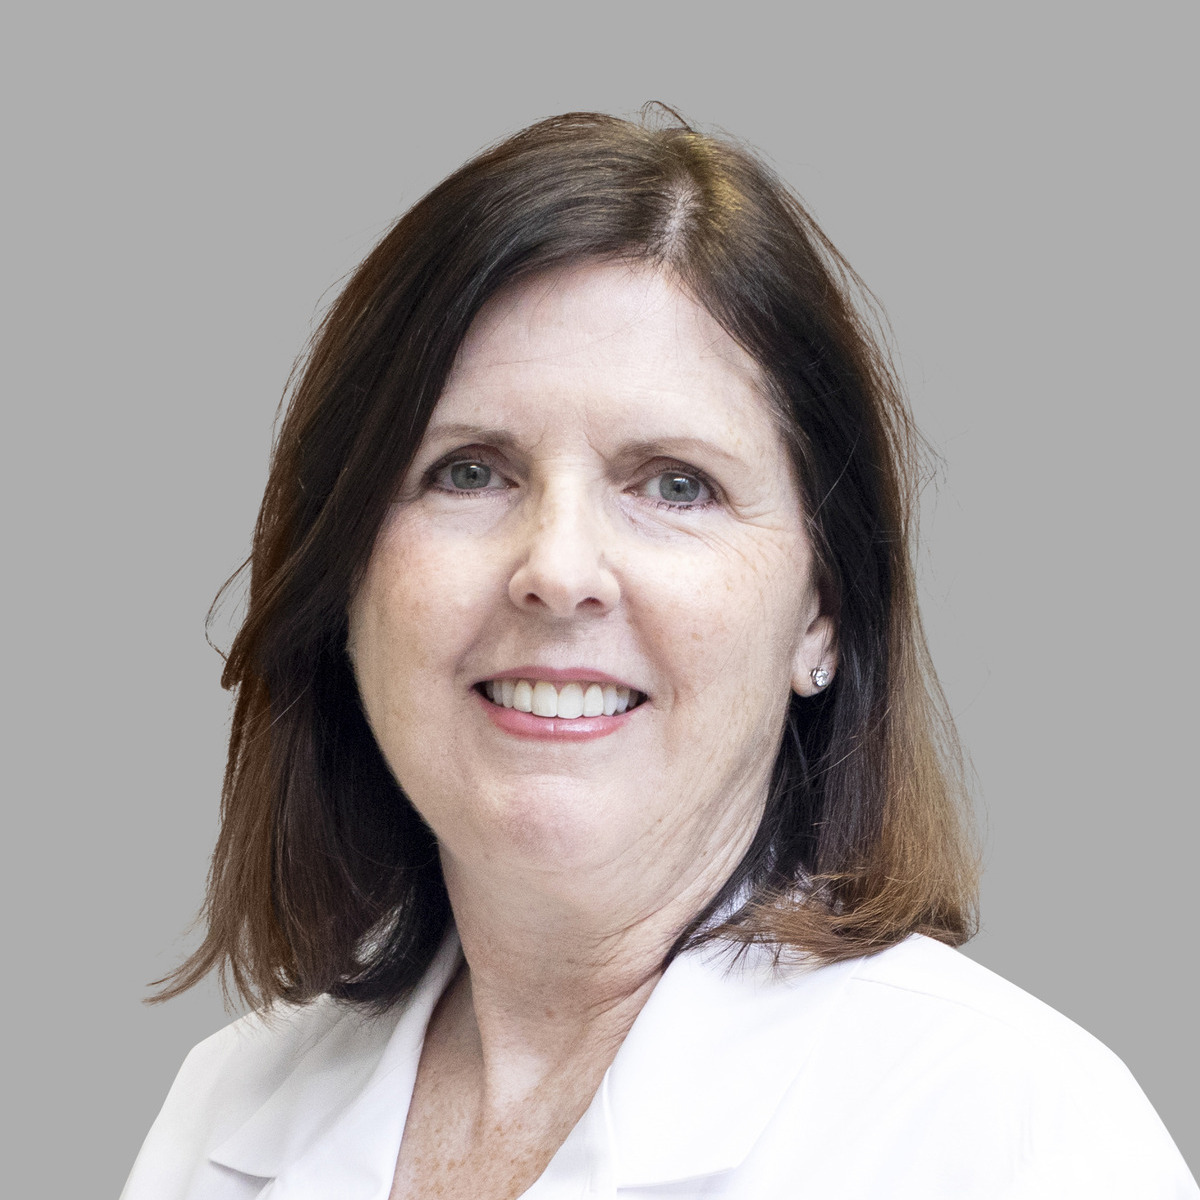 A friendly headshot of Lorie Hughes, MD